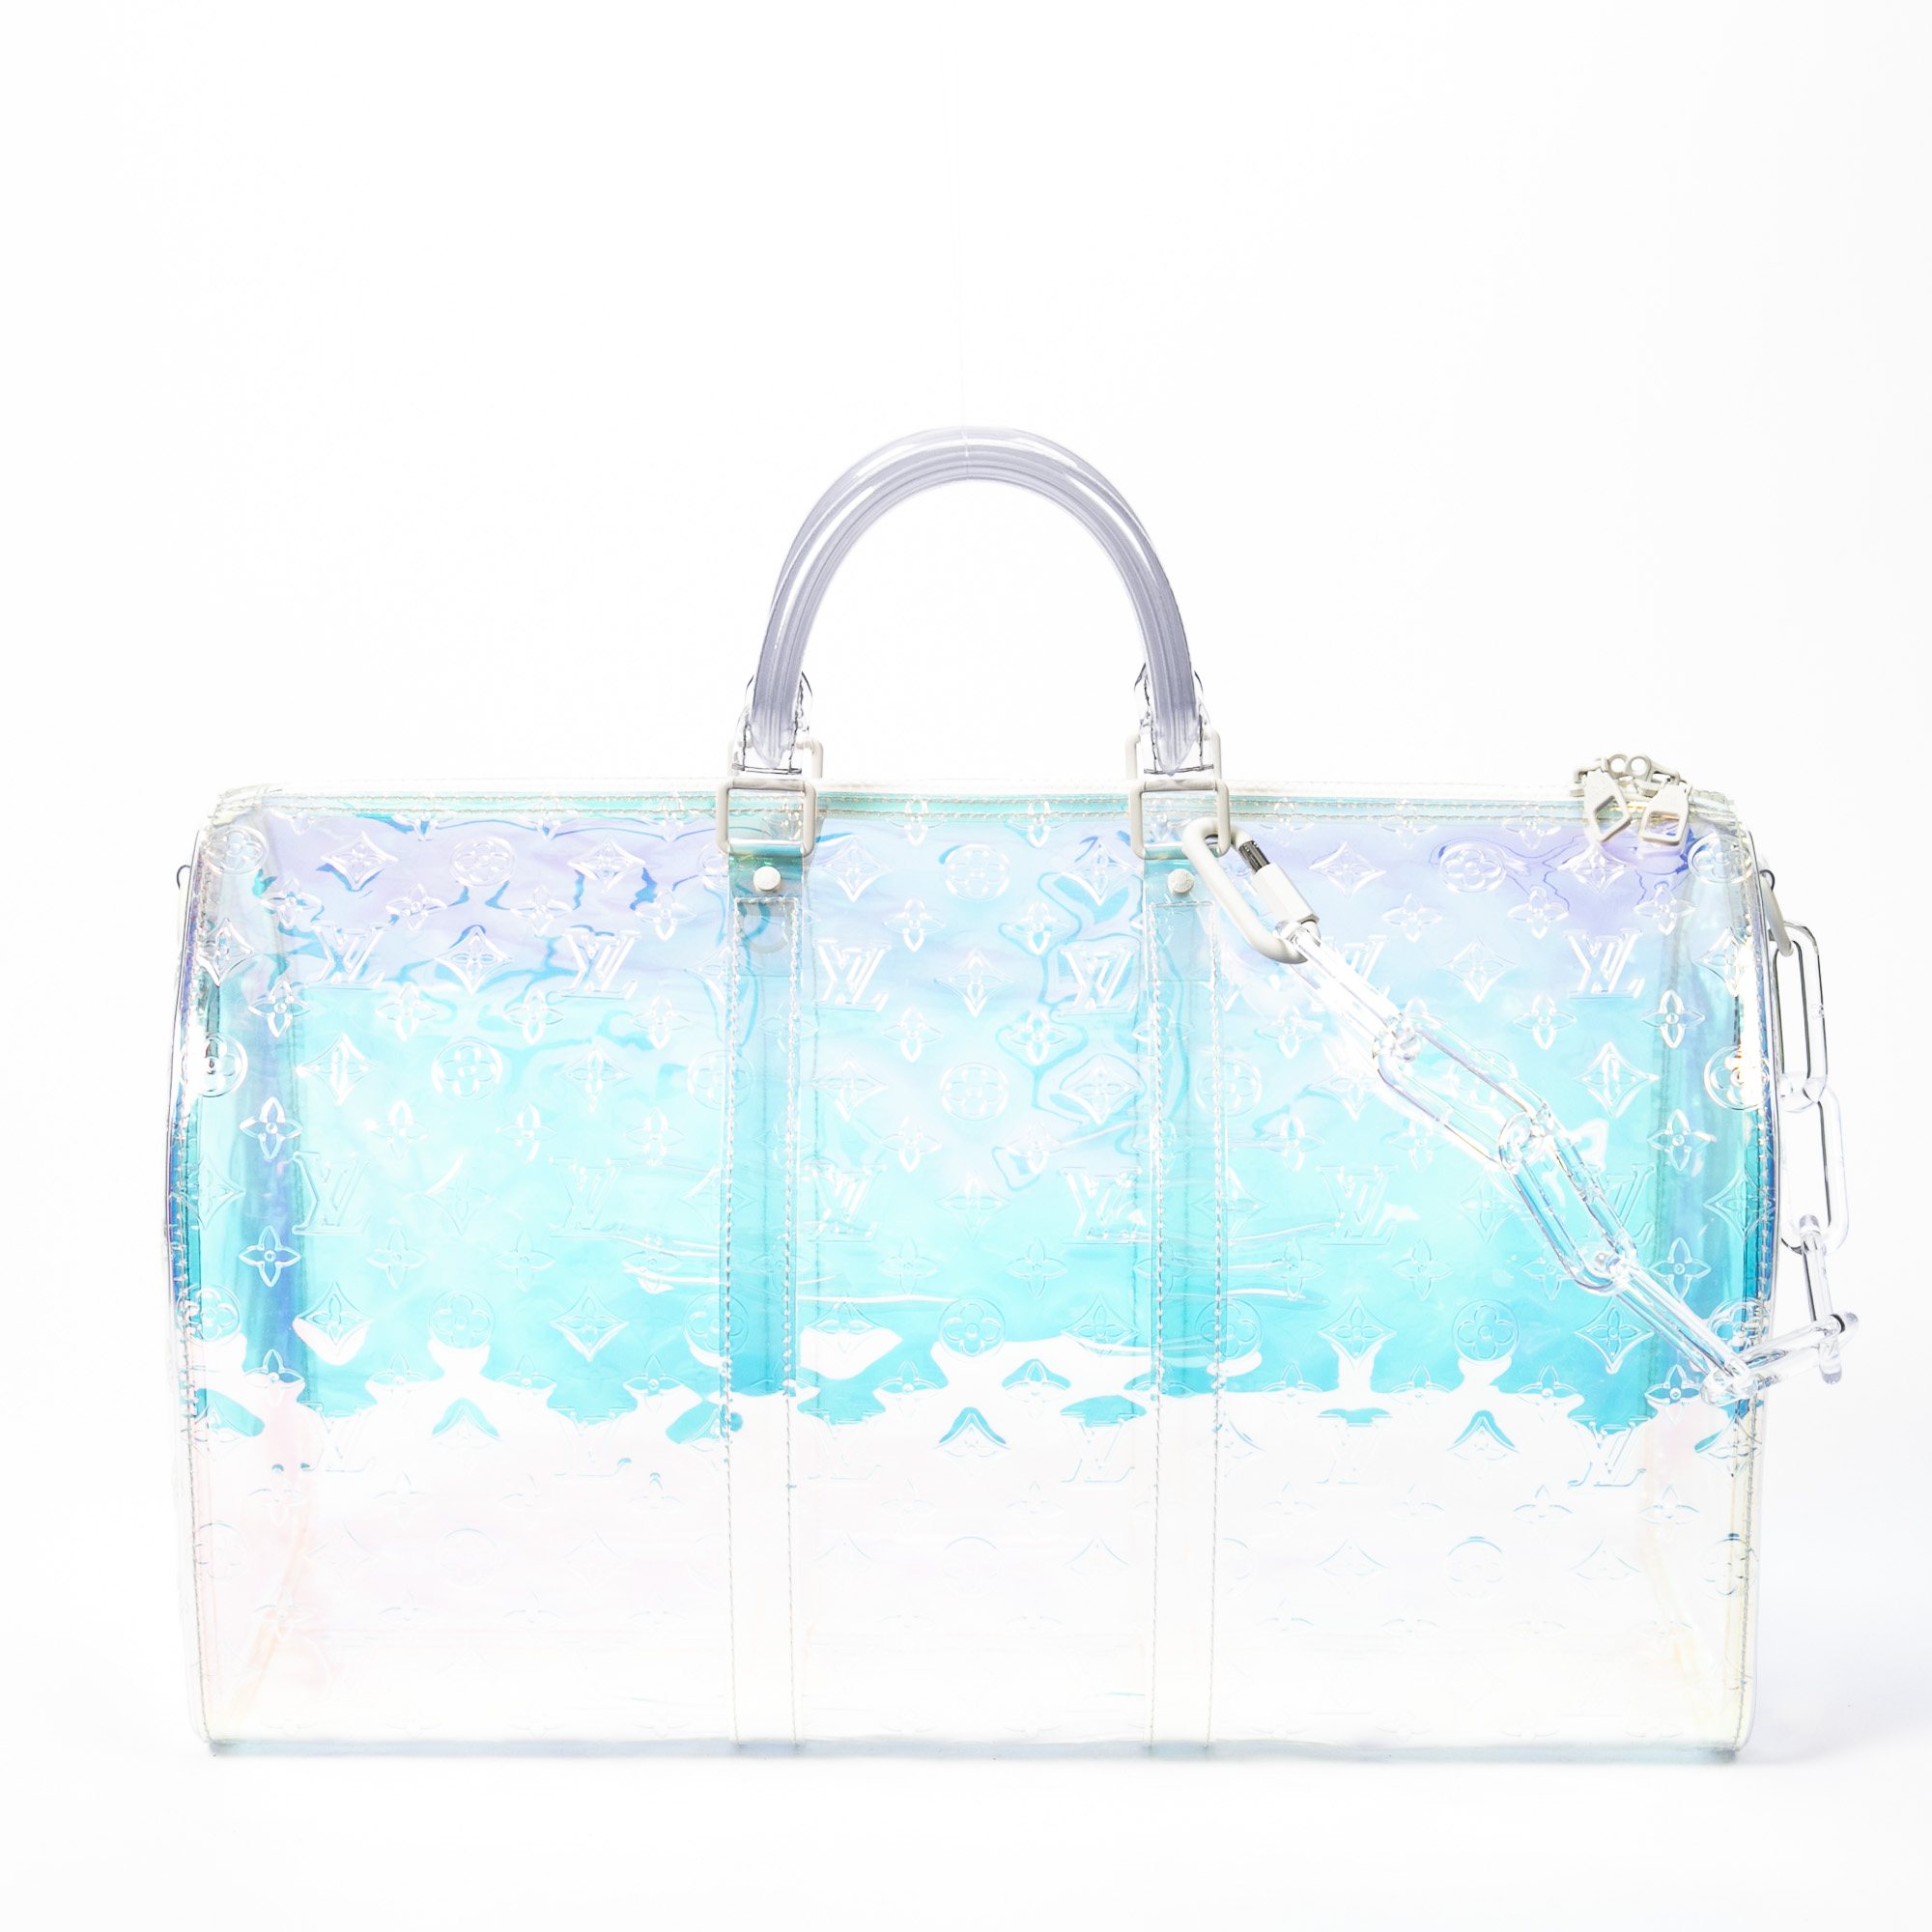 Sold at Auction: LOUIS VUITTON PRISM KEEPALL BANDOULIERE BY VIRGIL